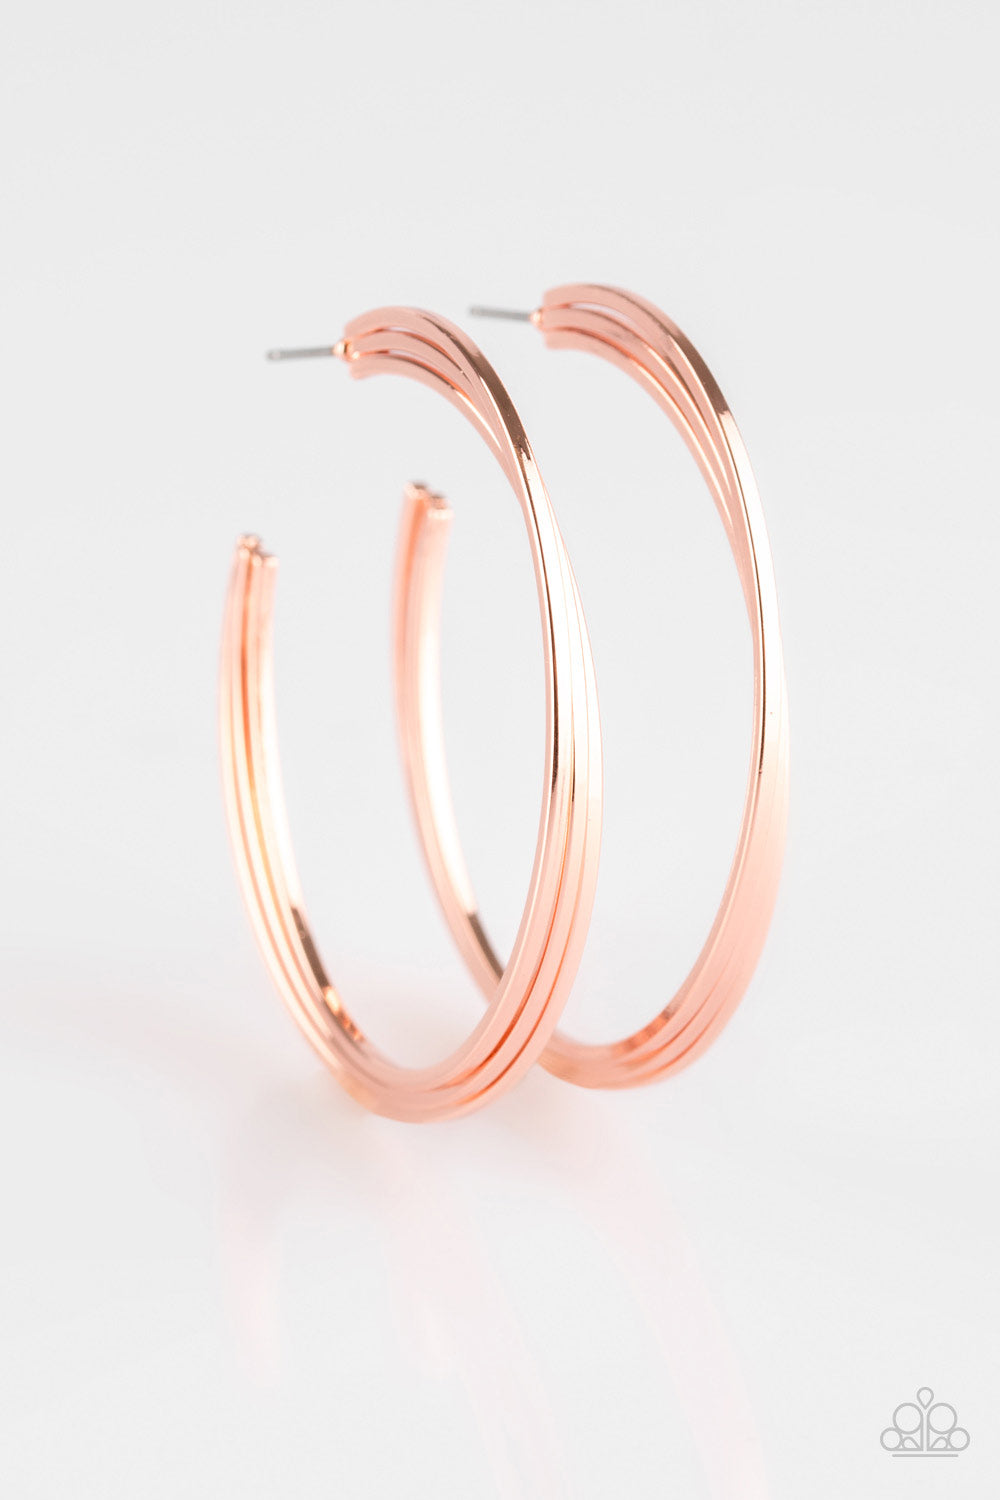 Three flat shiny copper bars curl into a bold industrial hoop. Earring attaches to a standard post fitting. Hoop measures 2